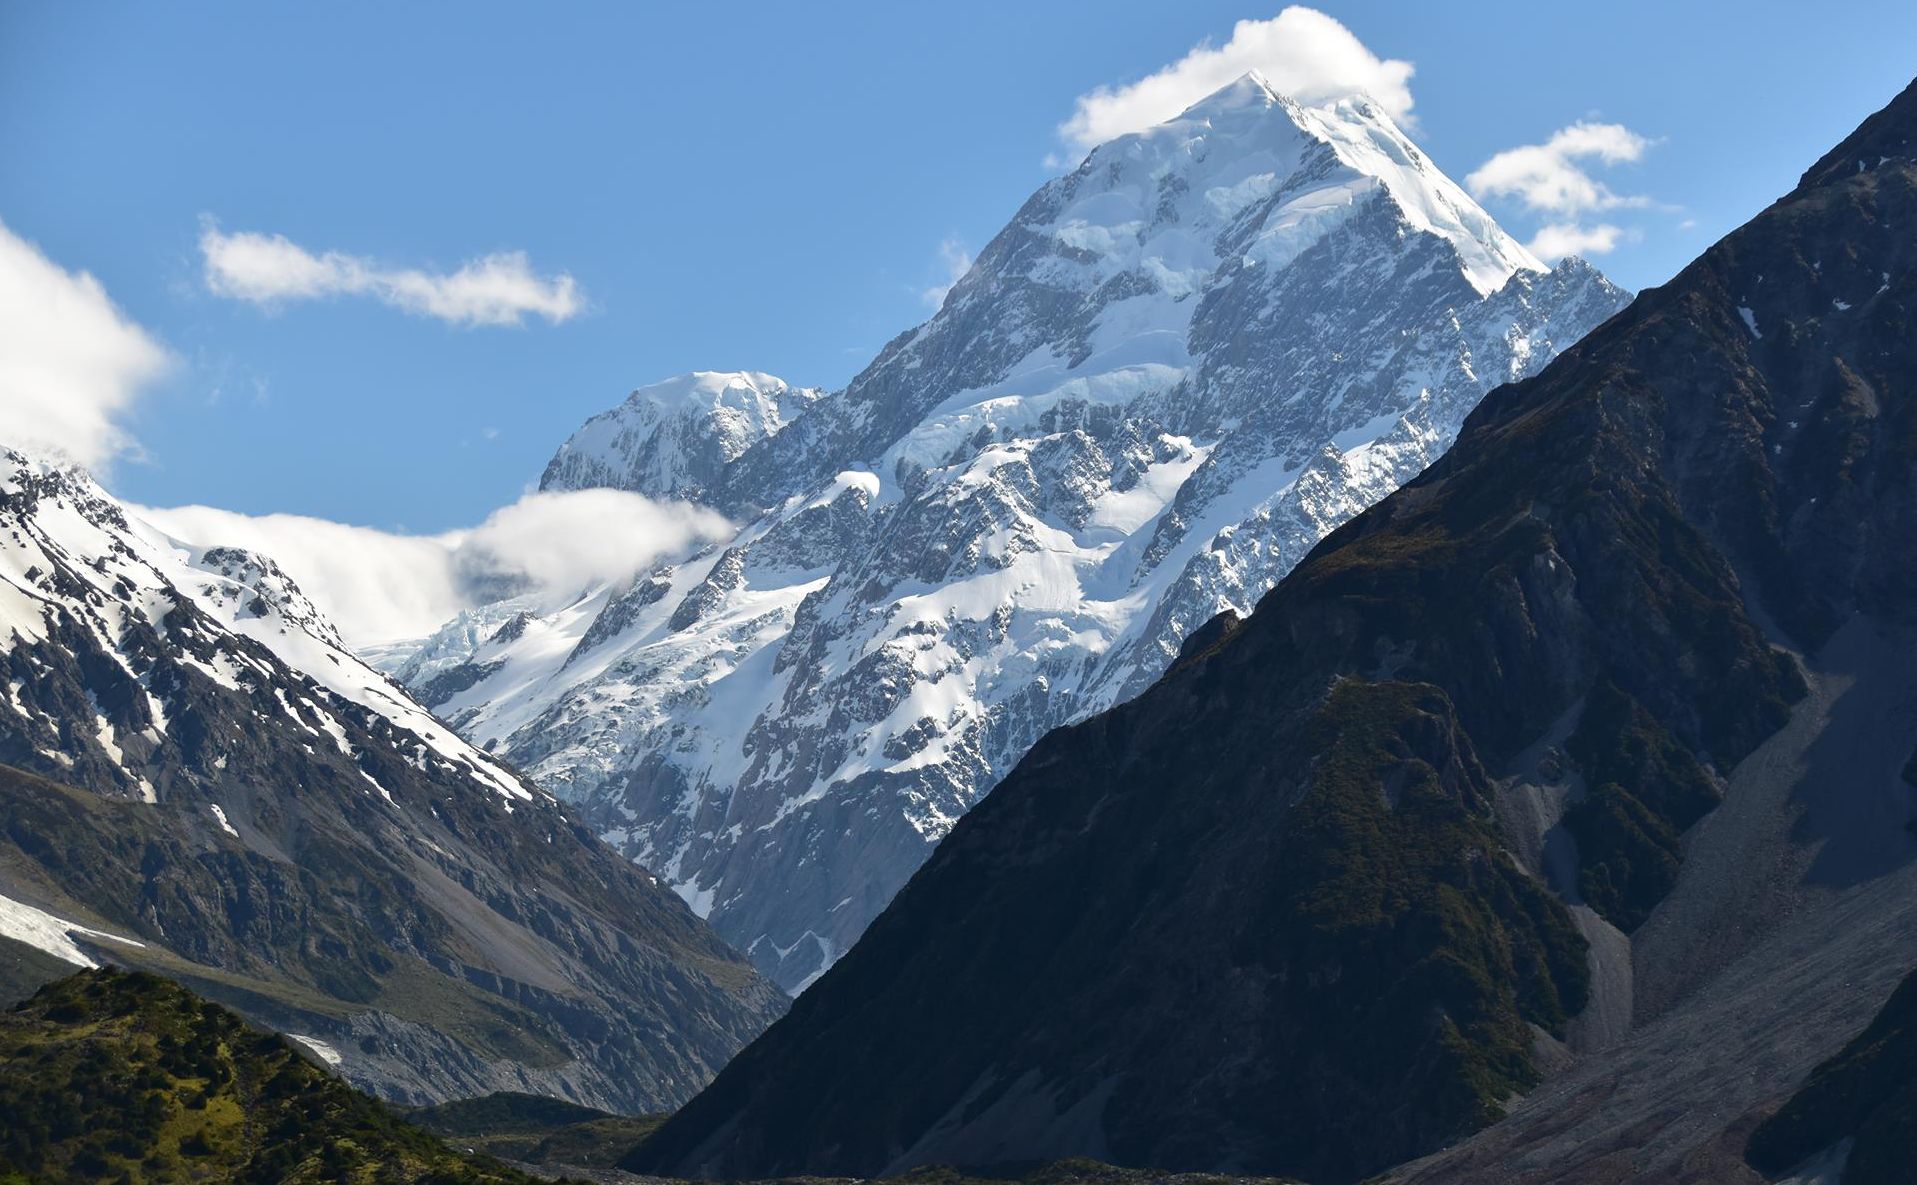 Mount Cook from Hooker Valley in the Southern Alps of New Zealand